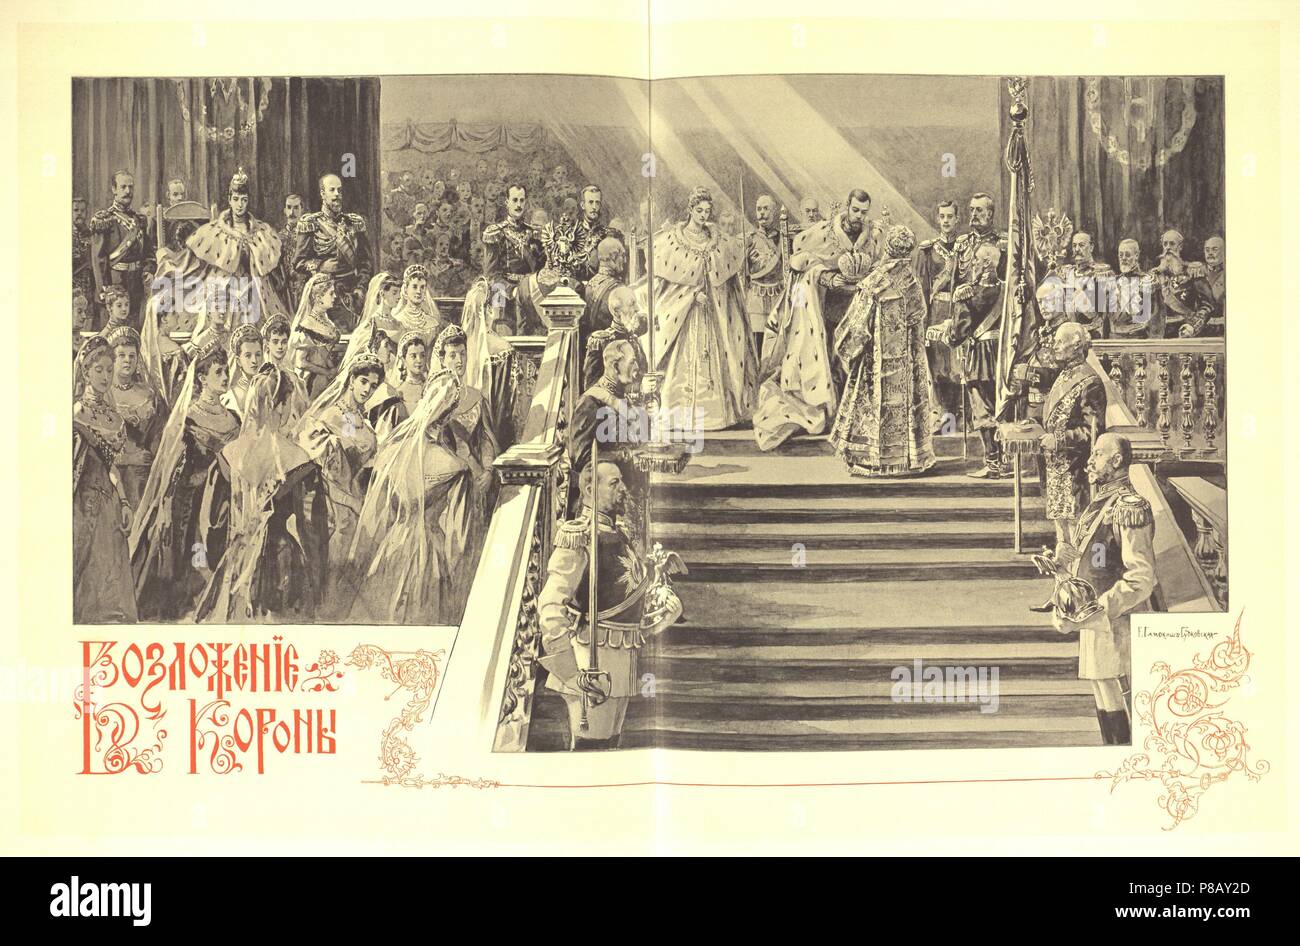 The Coronation Ceremony of Nicholas II. Museum: State History Museum, Moscow. Stock Photo